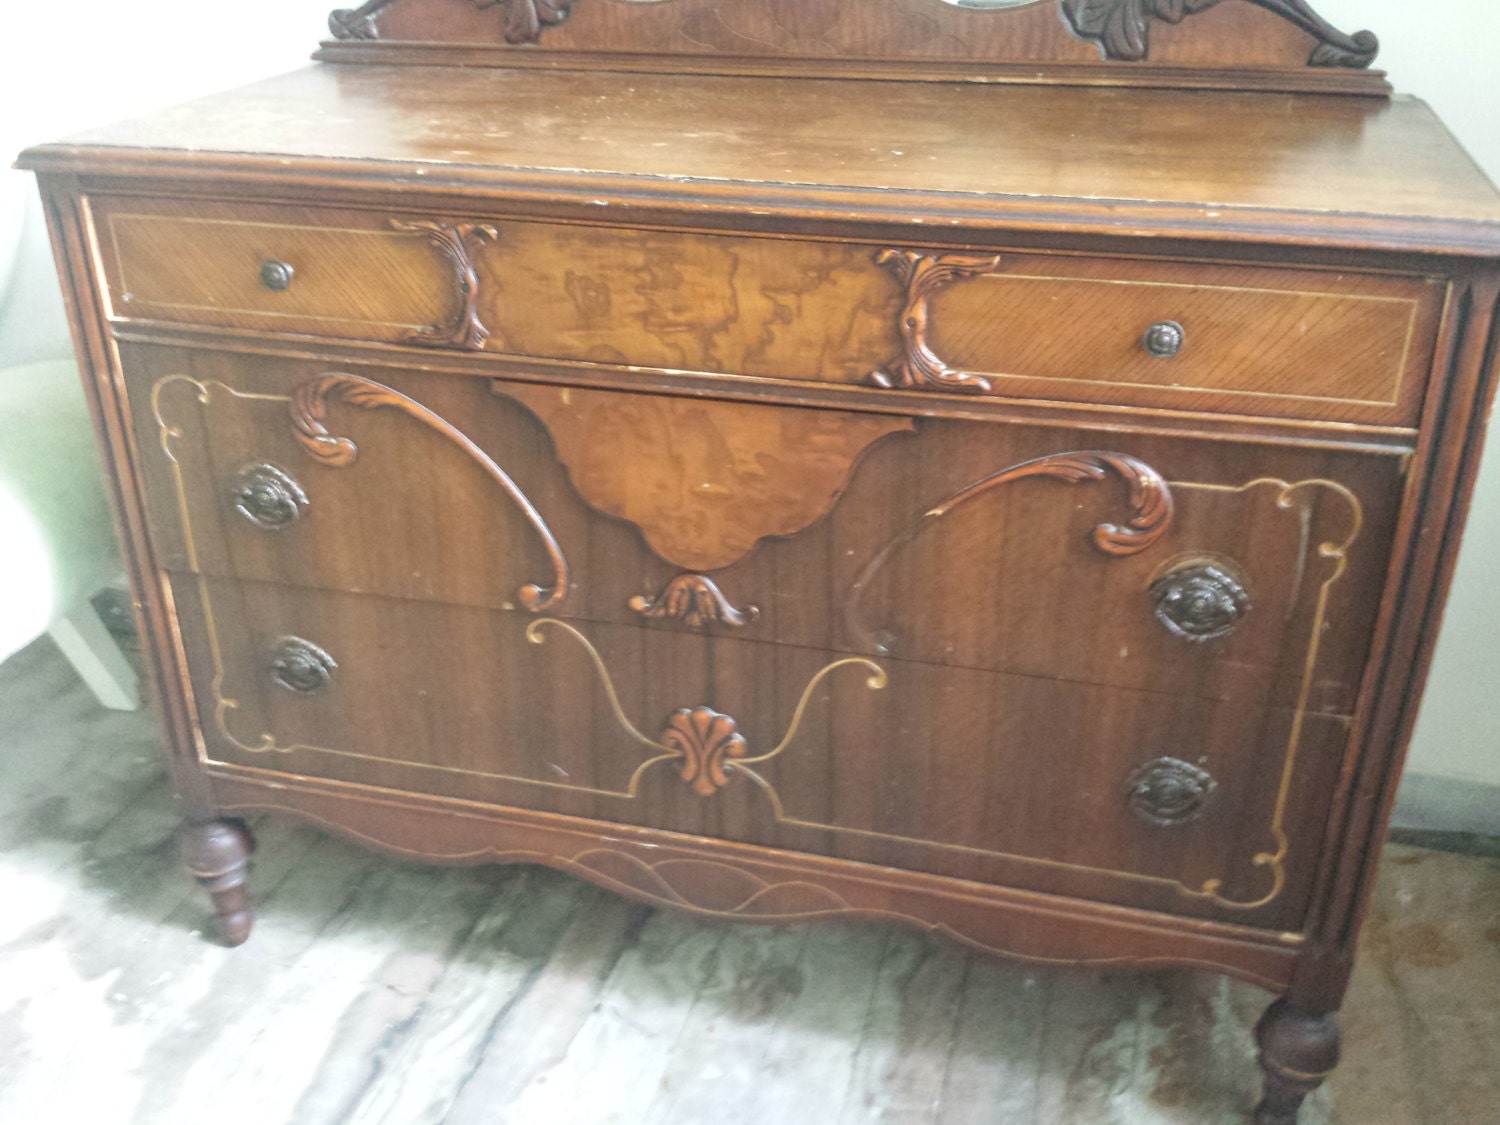 Free NYC DeliveryAntique Art Deco Waterfall Dresser by